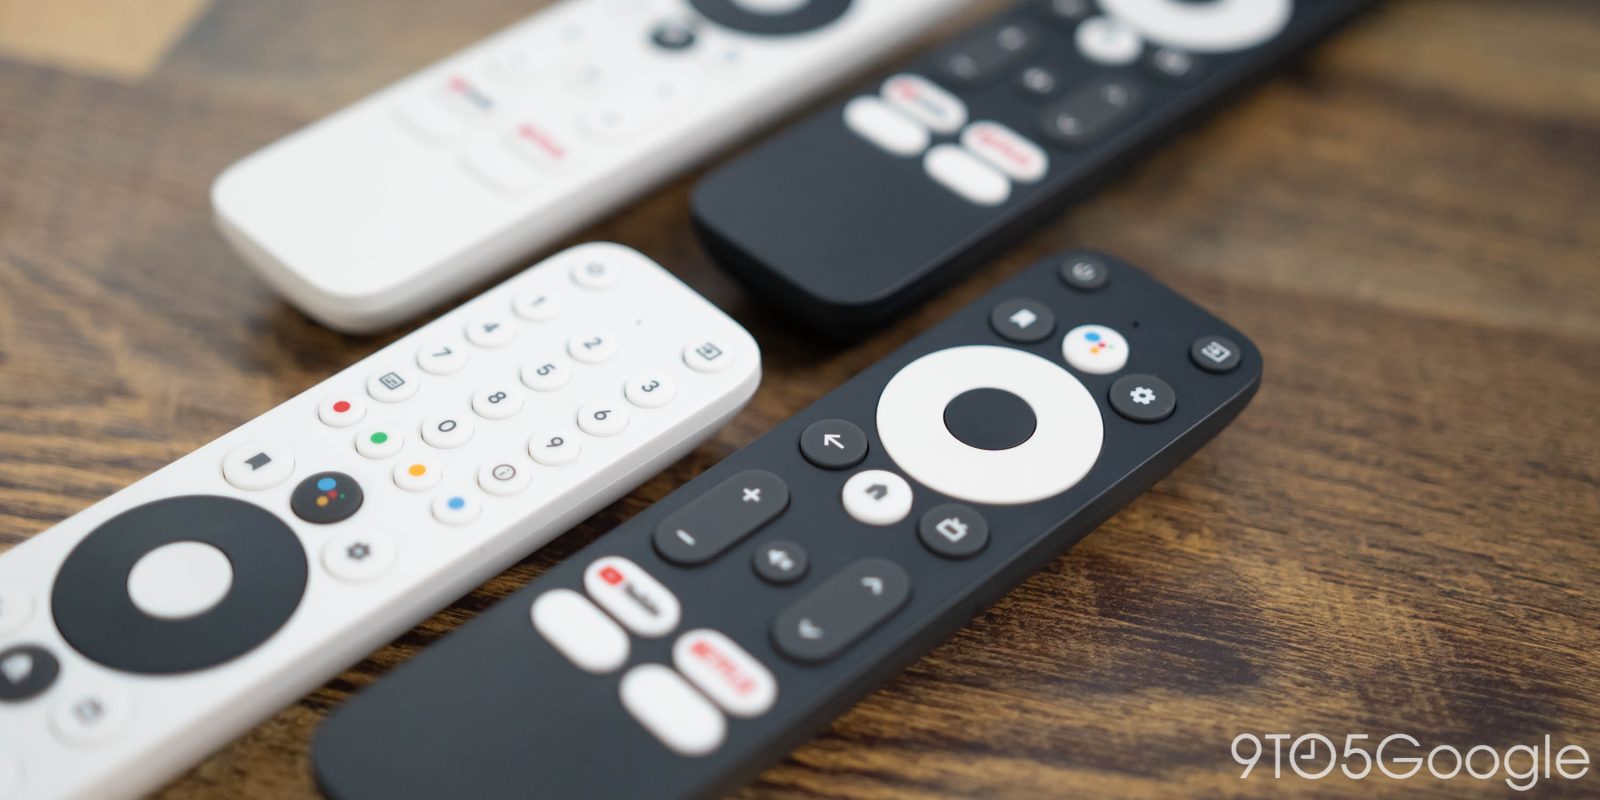  New Universal Remote Control Compatible with Google